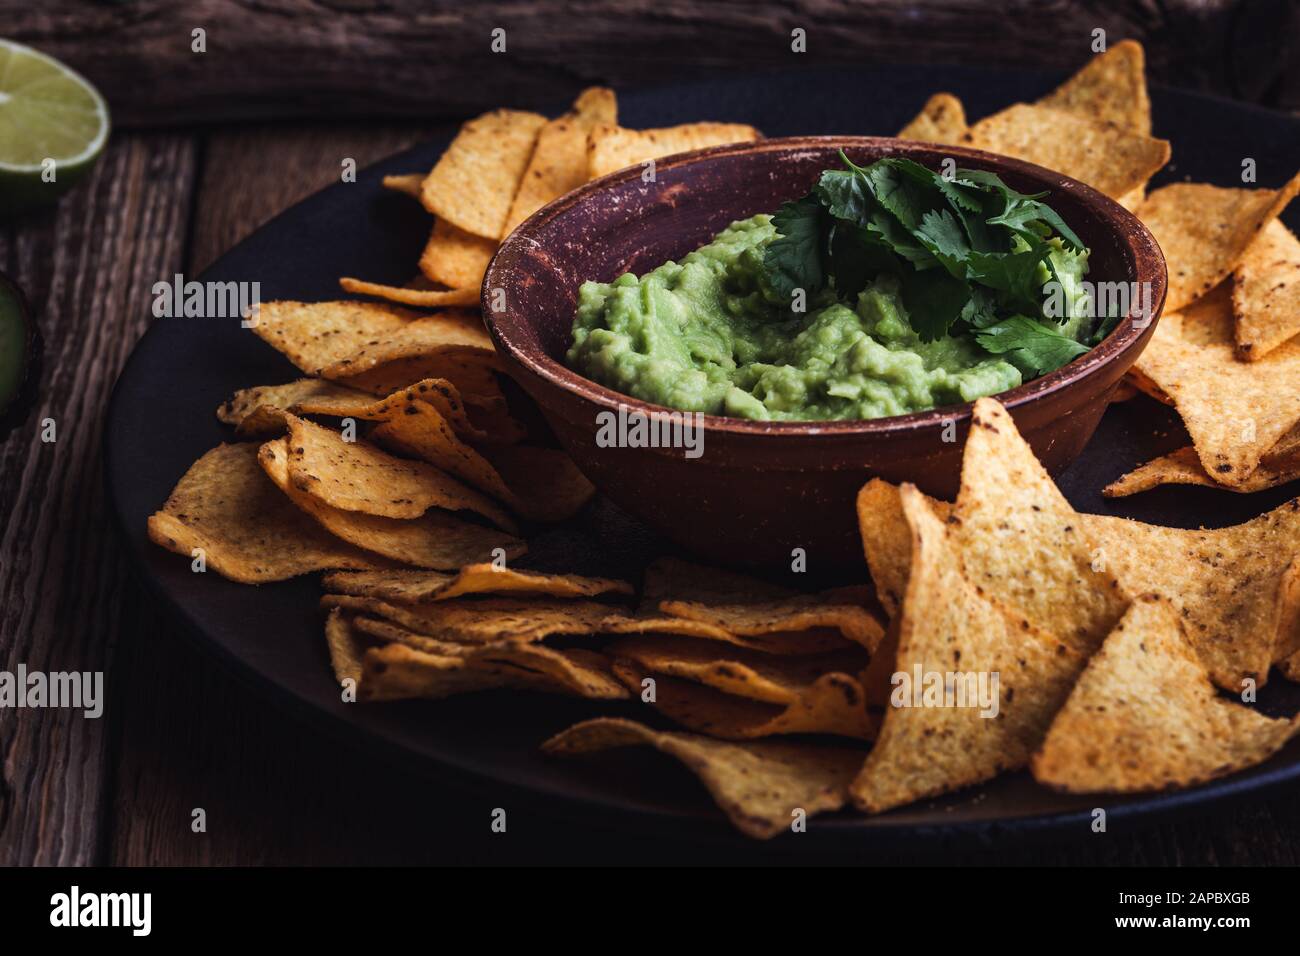 Mexican traditional food, guacamole sauce, ingredients  avocado, cilantro, lime and tortilla corn chips on wooden rural table. Preparing local food Stock Photo